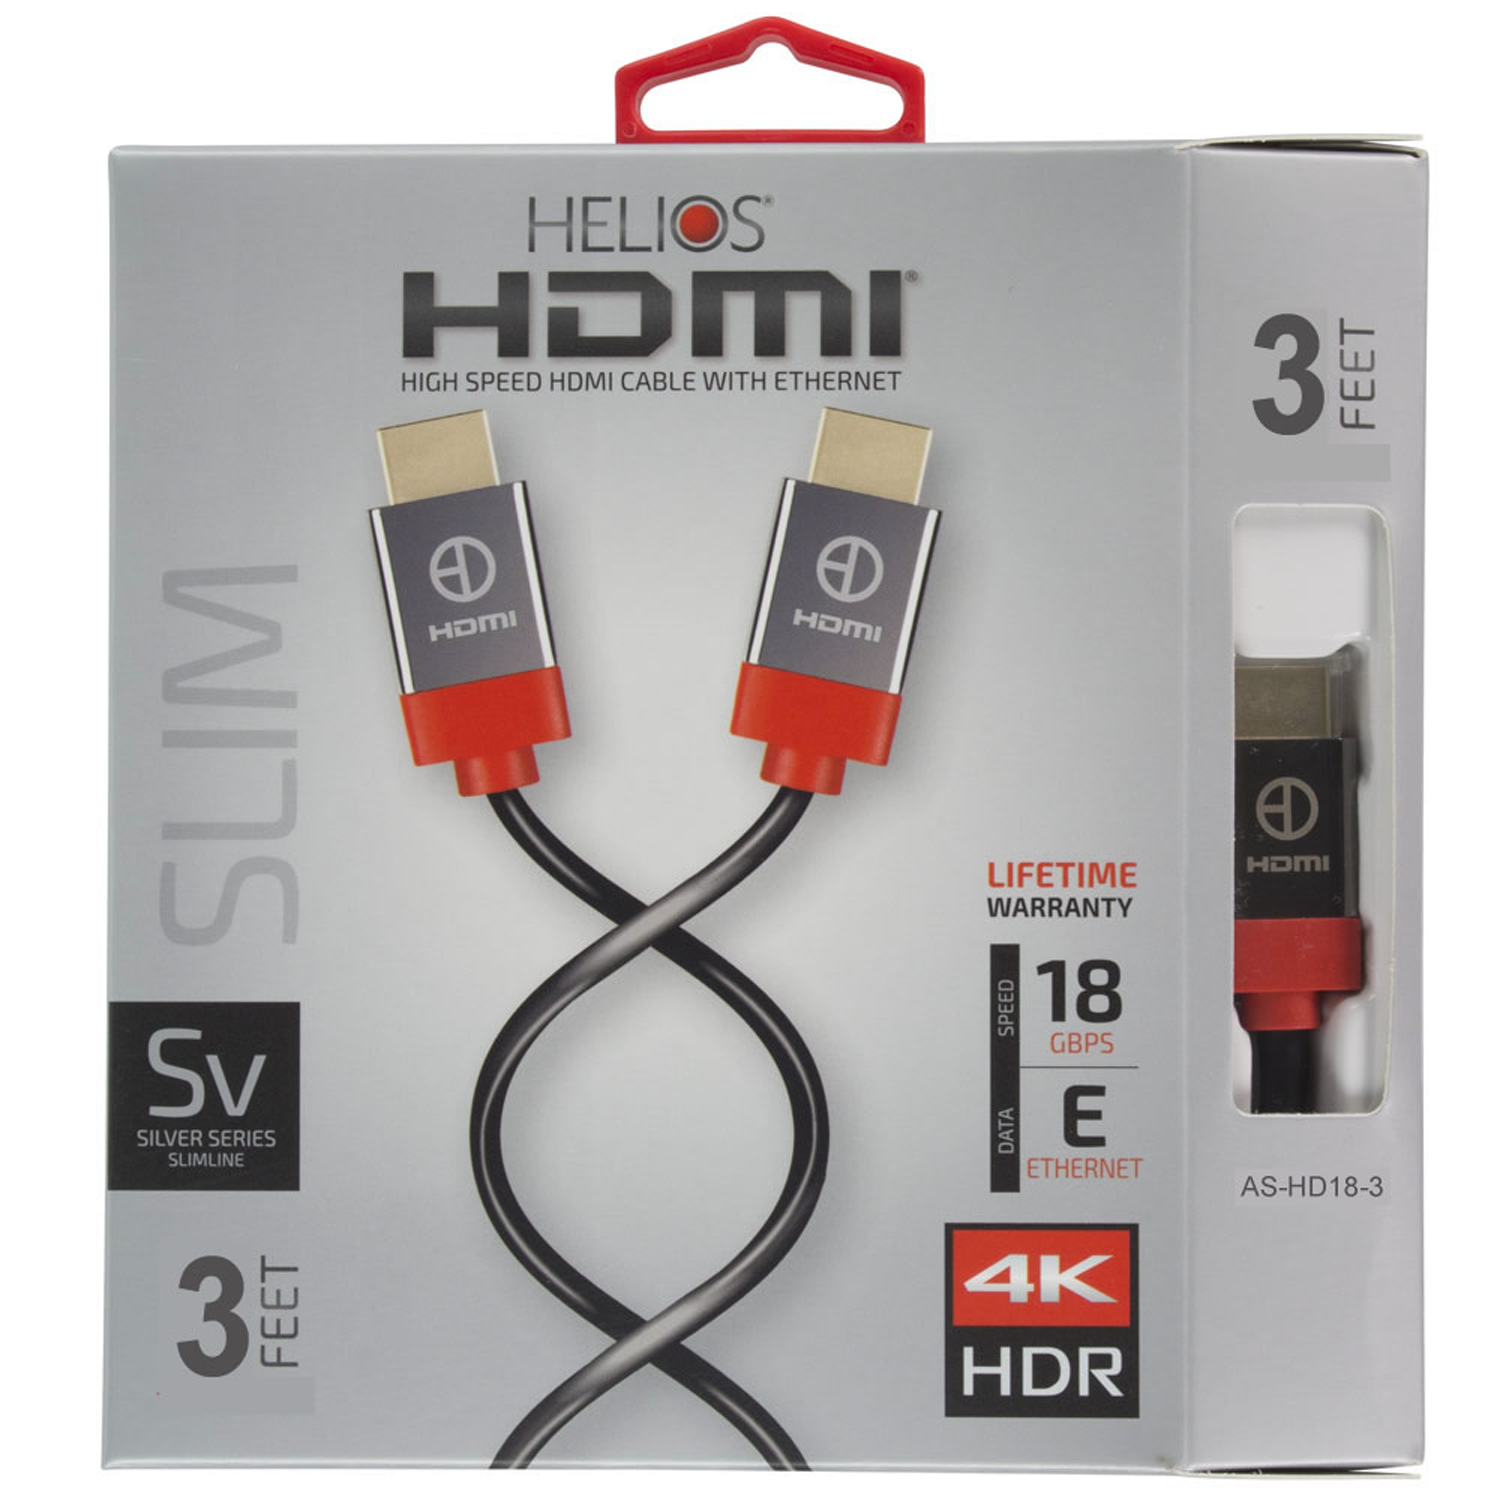 METRA AV HELIOS 3ft High Speed 48Gbps HDMI Cable